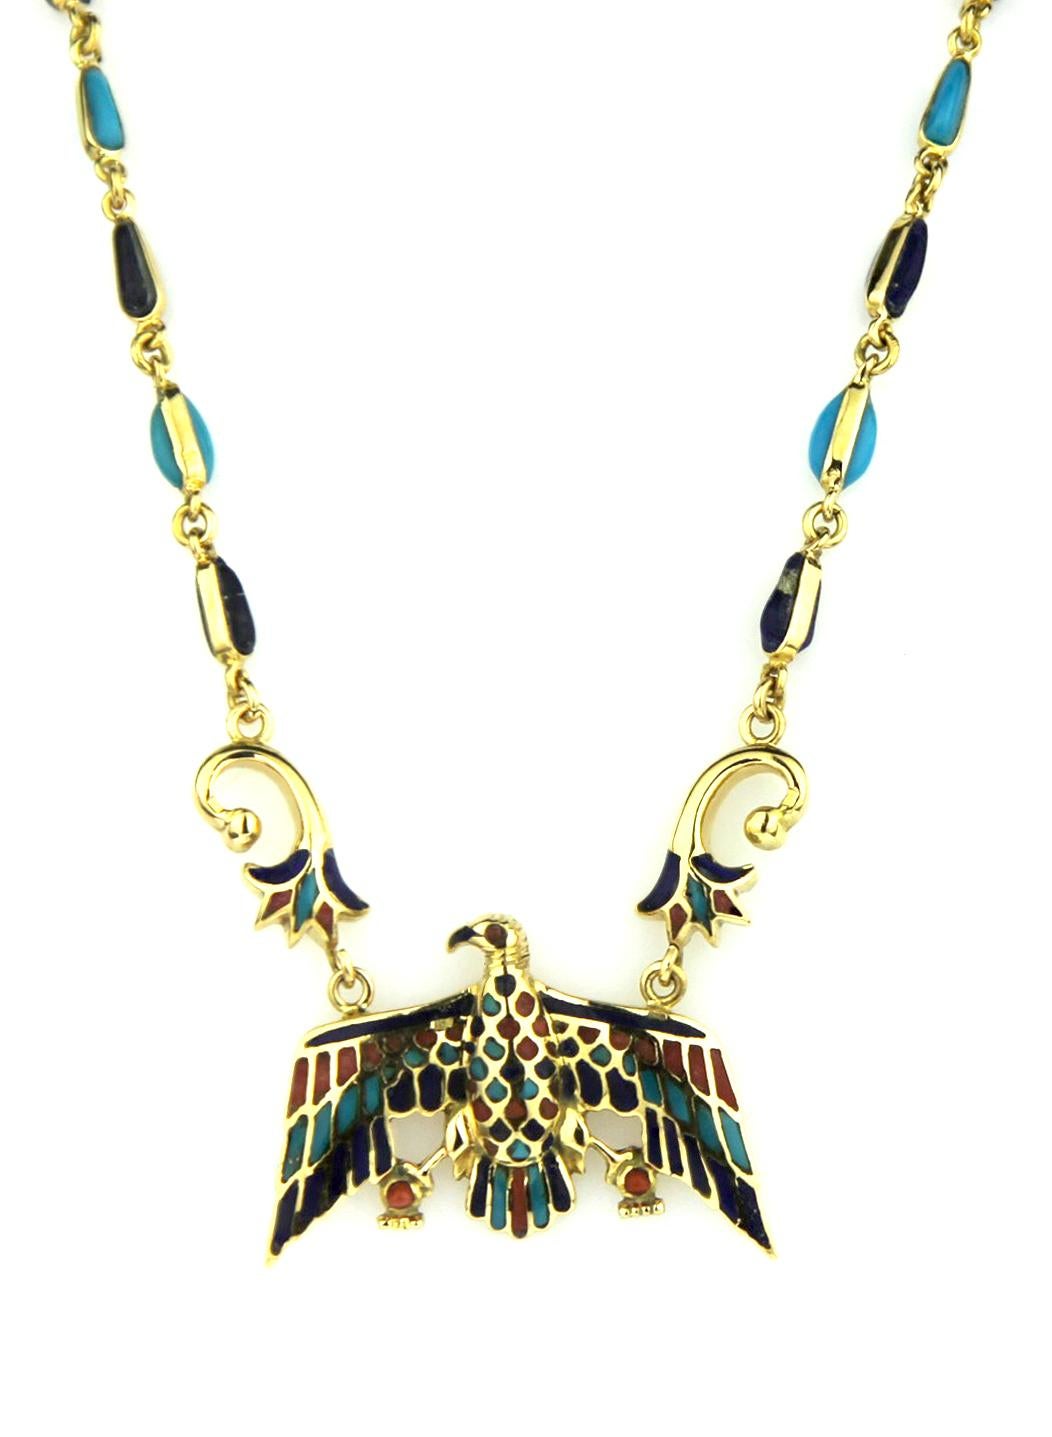 Retro Vintage Eagle Necklace in 18K Gold, Coral, Lapis Lazuli, and Turquoise Mosaics For Sale